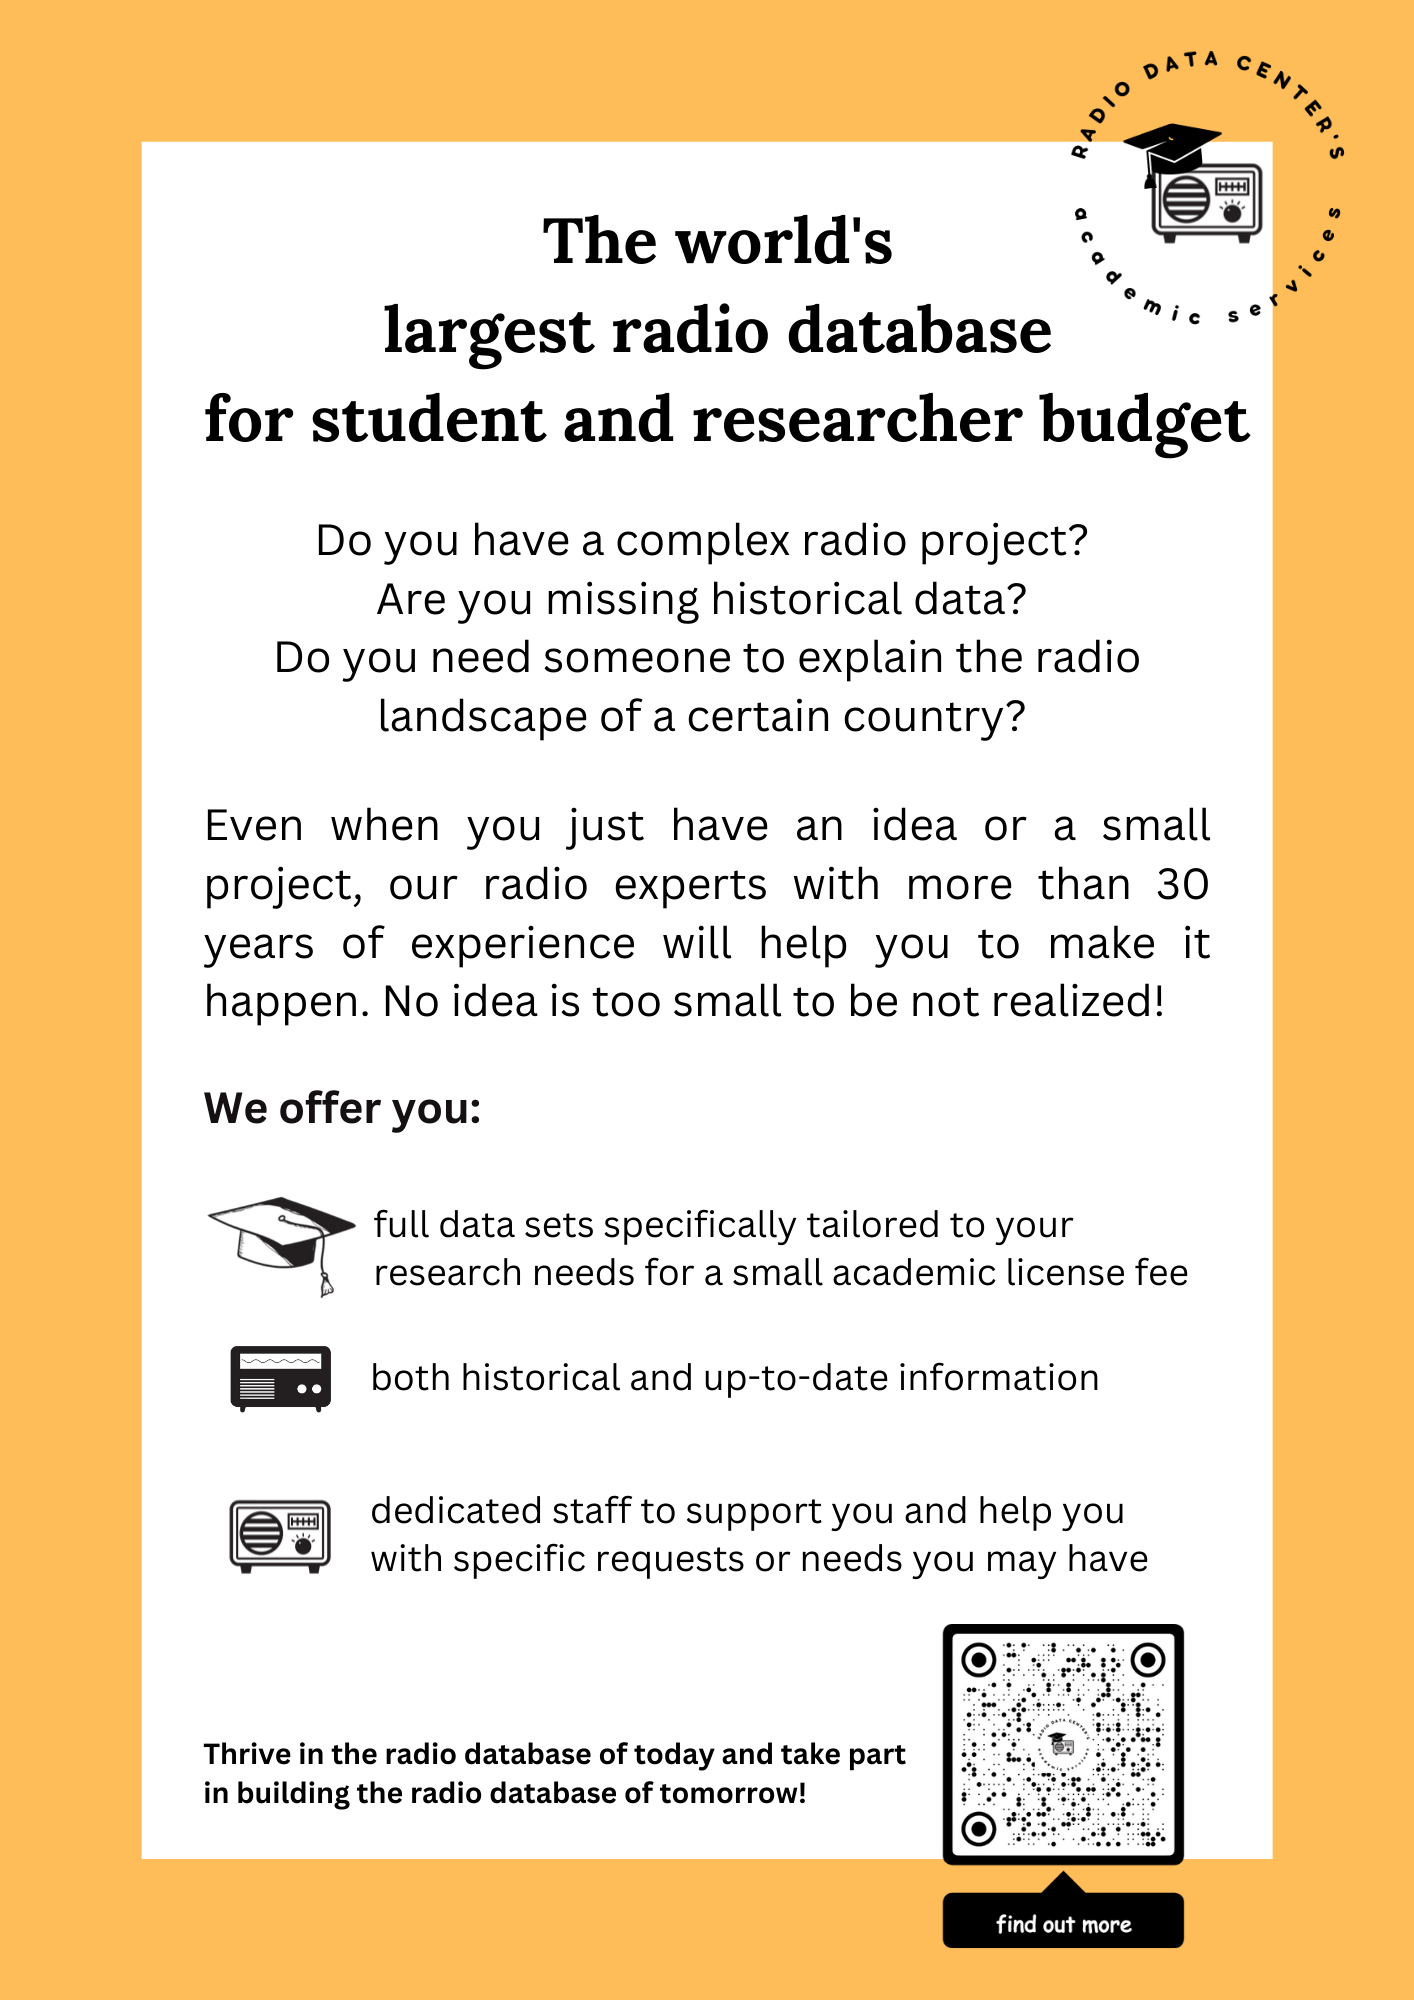 Advertisement for Academic Services, a database for students and researchers